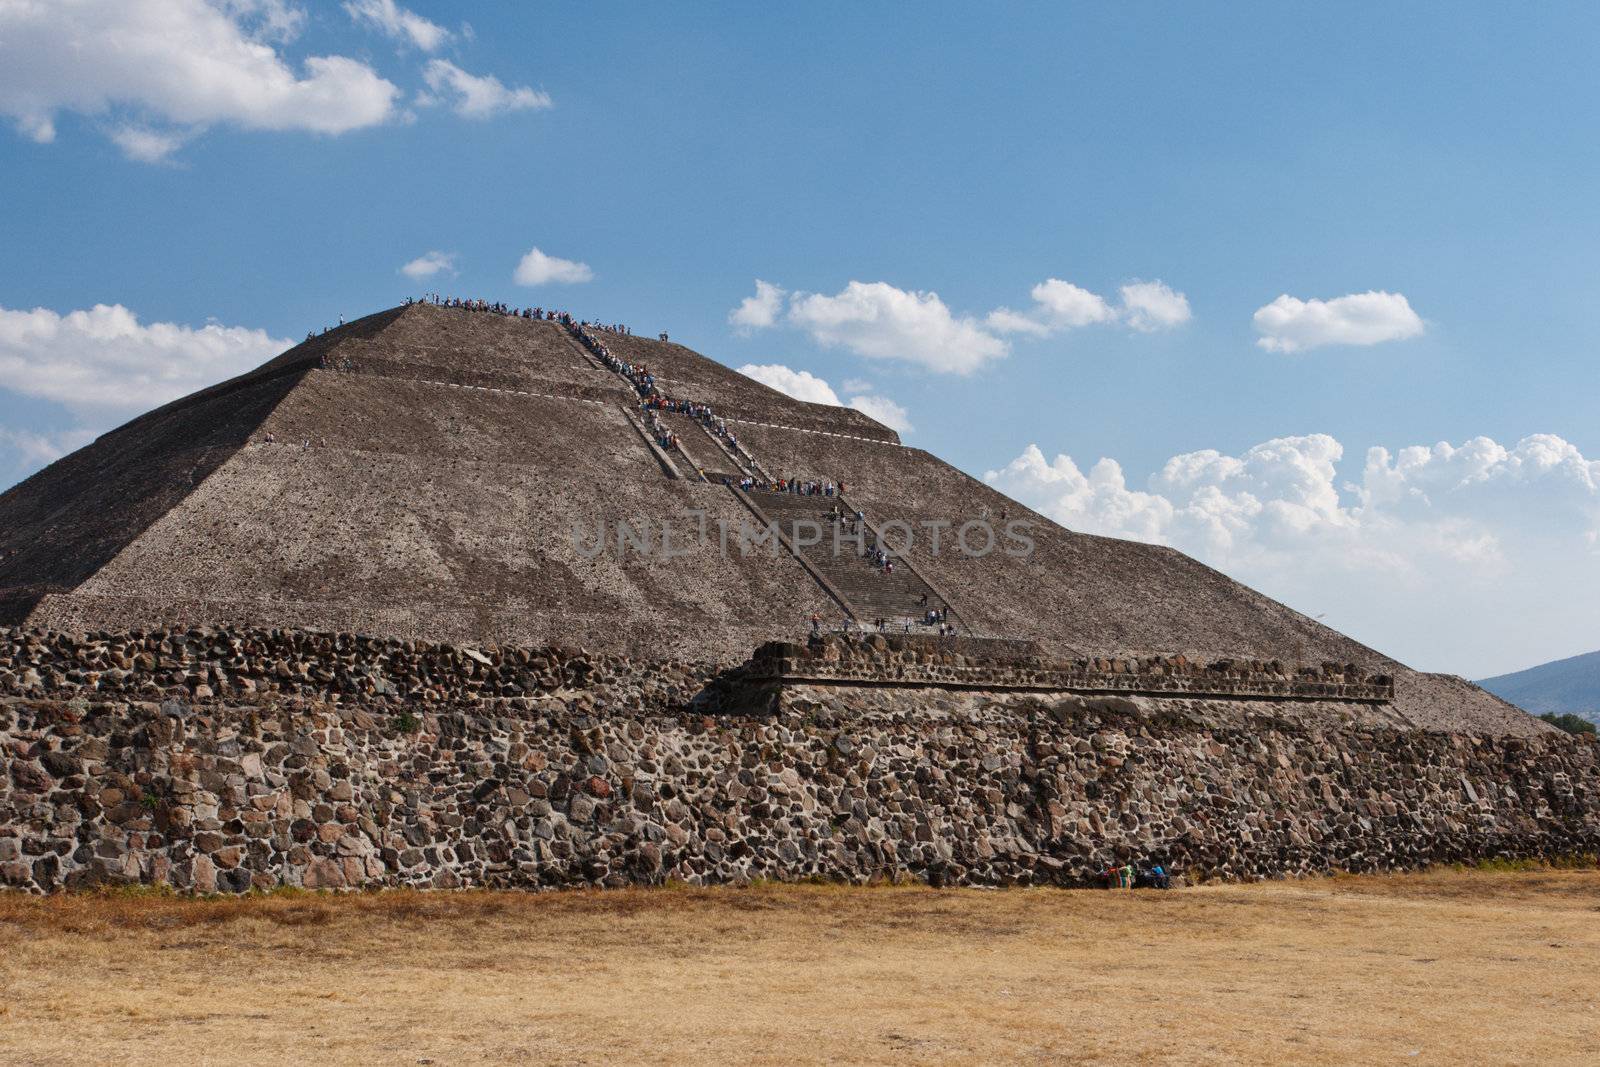 Pyramid of the Sun. Teotihuacan, Mexico by dimol